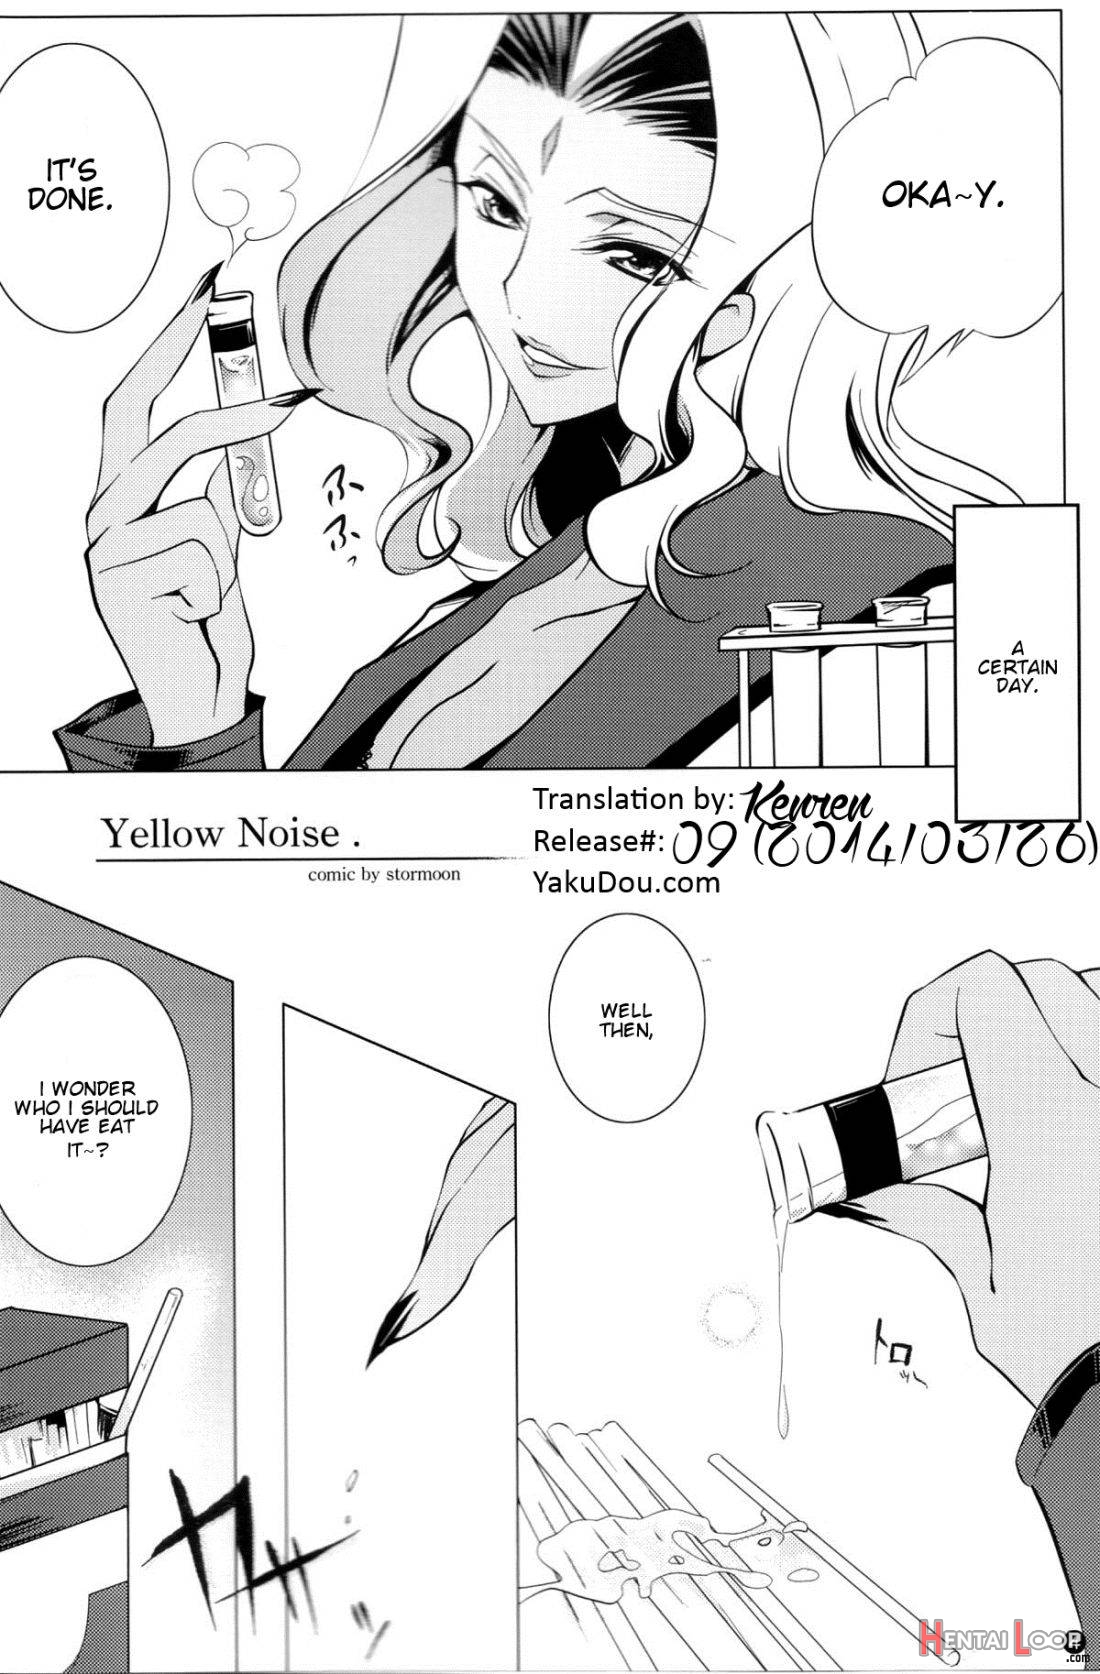 Yellow Noise page 3